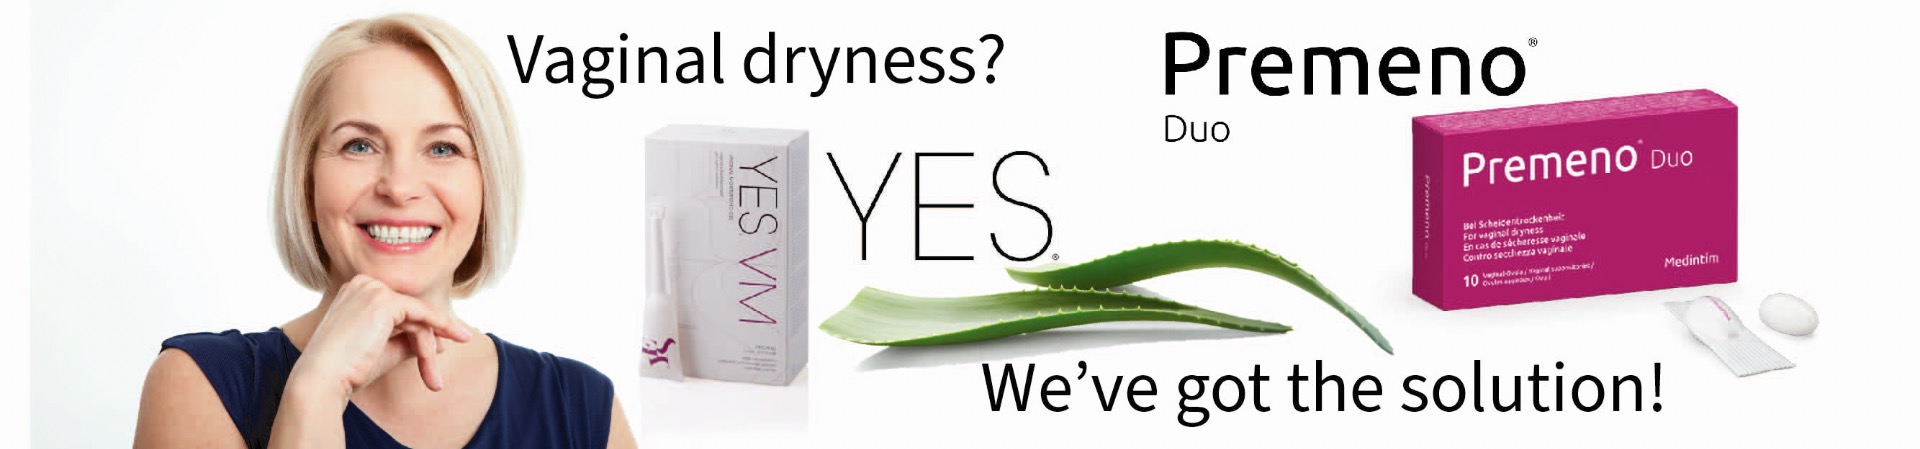 Premeno and YES VM for vaginal dryness and menopause relief